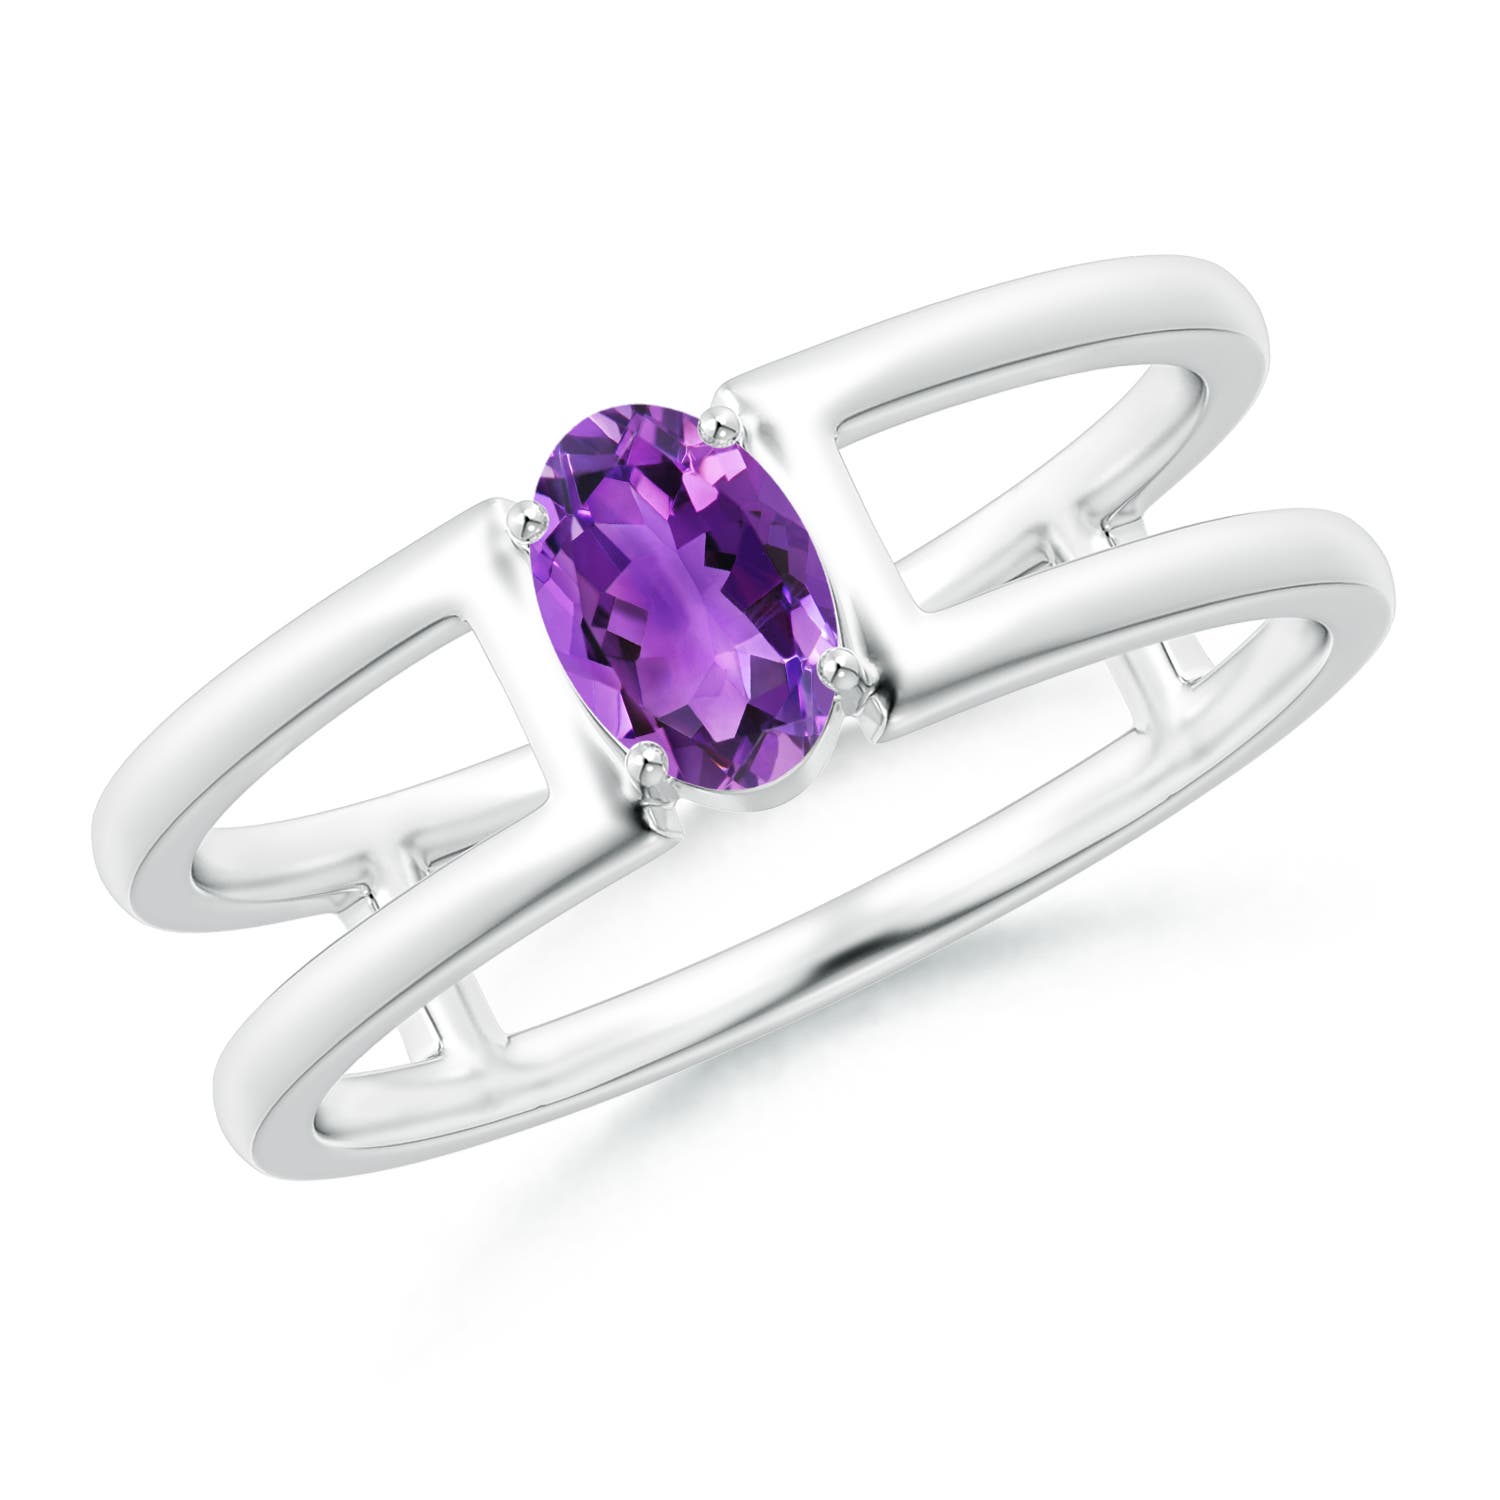 AAA - Amethyst / 0.4 CT / 14 KT White Gold